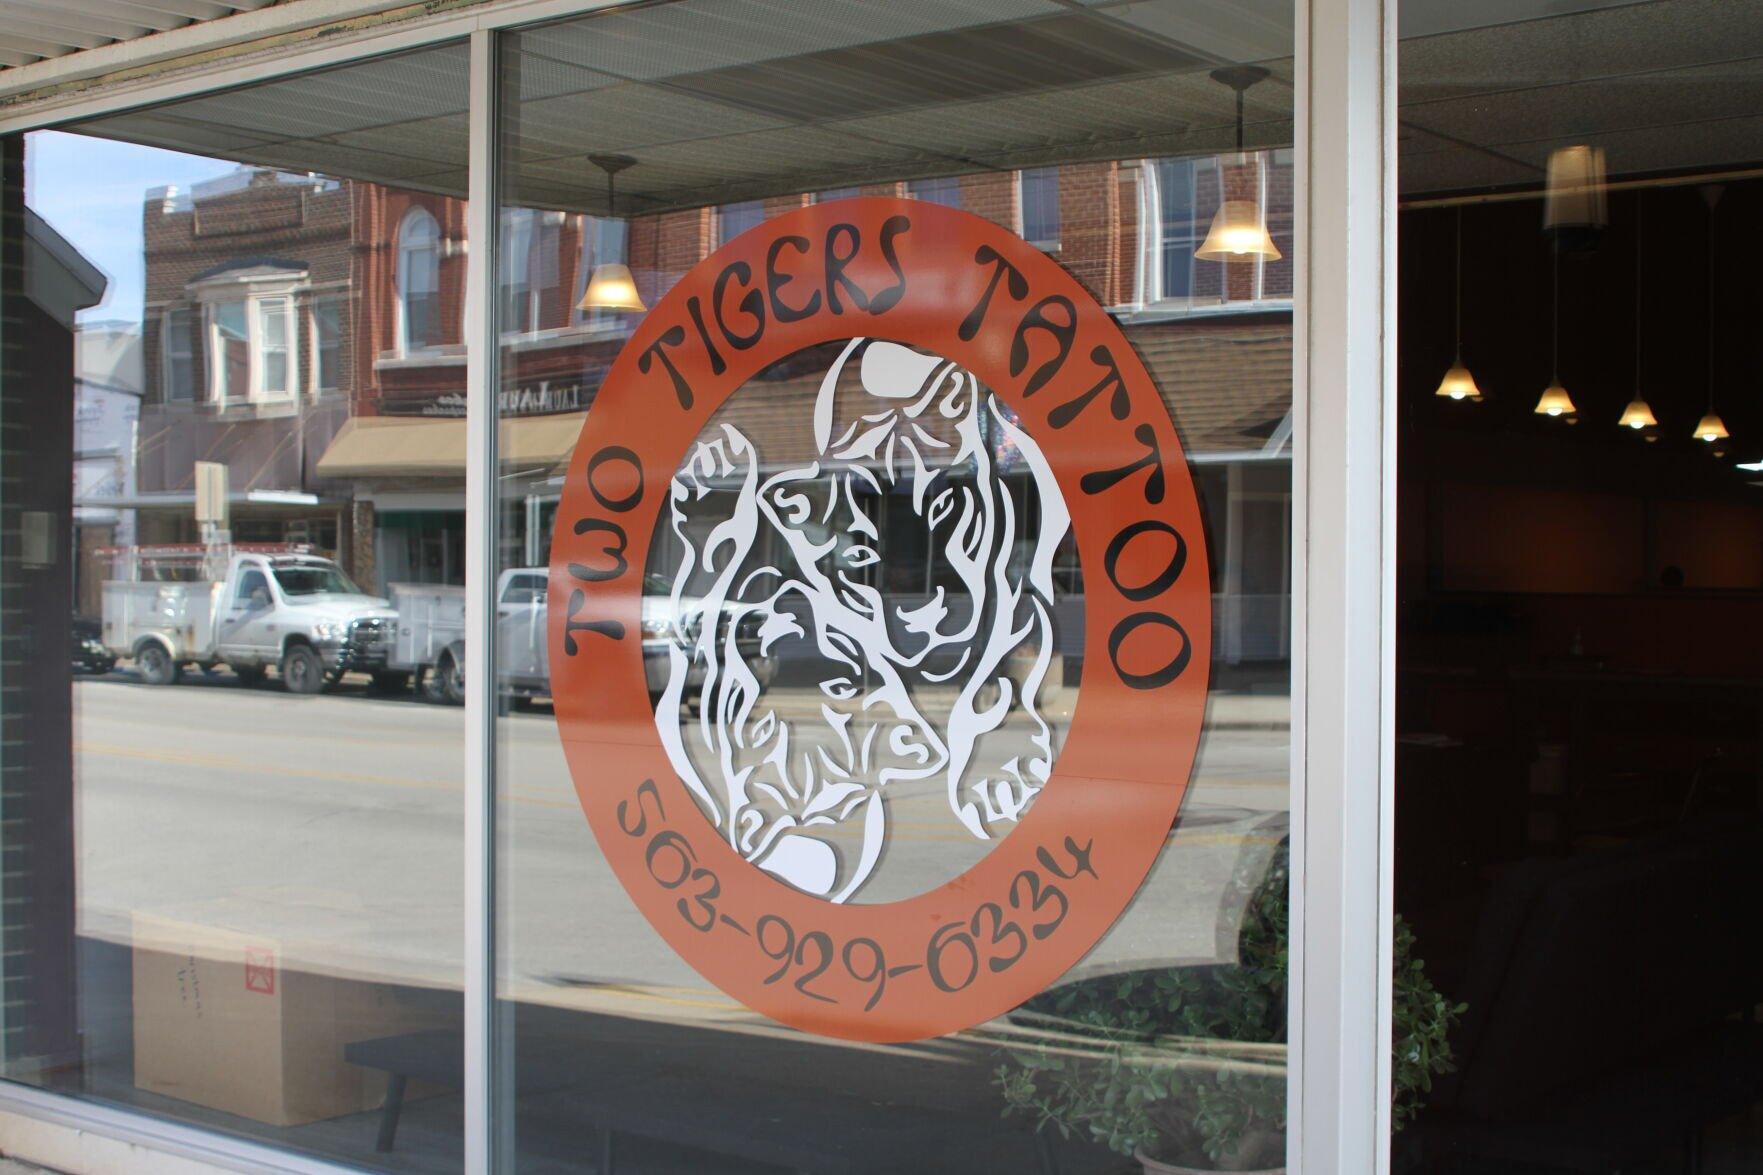 Two Tigers Tattoo is located at 110 S. Franklin St. in Manchester, Iowa.    PHOTO CREDIT: Mike Putz